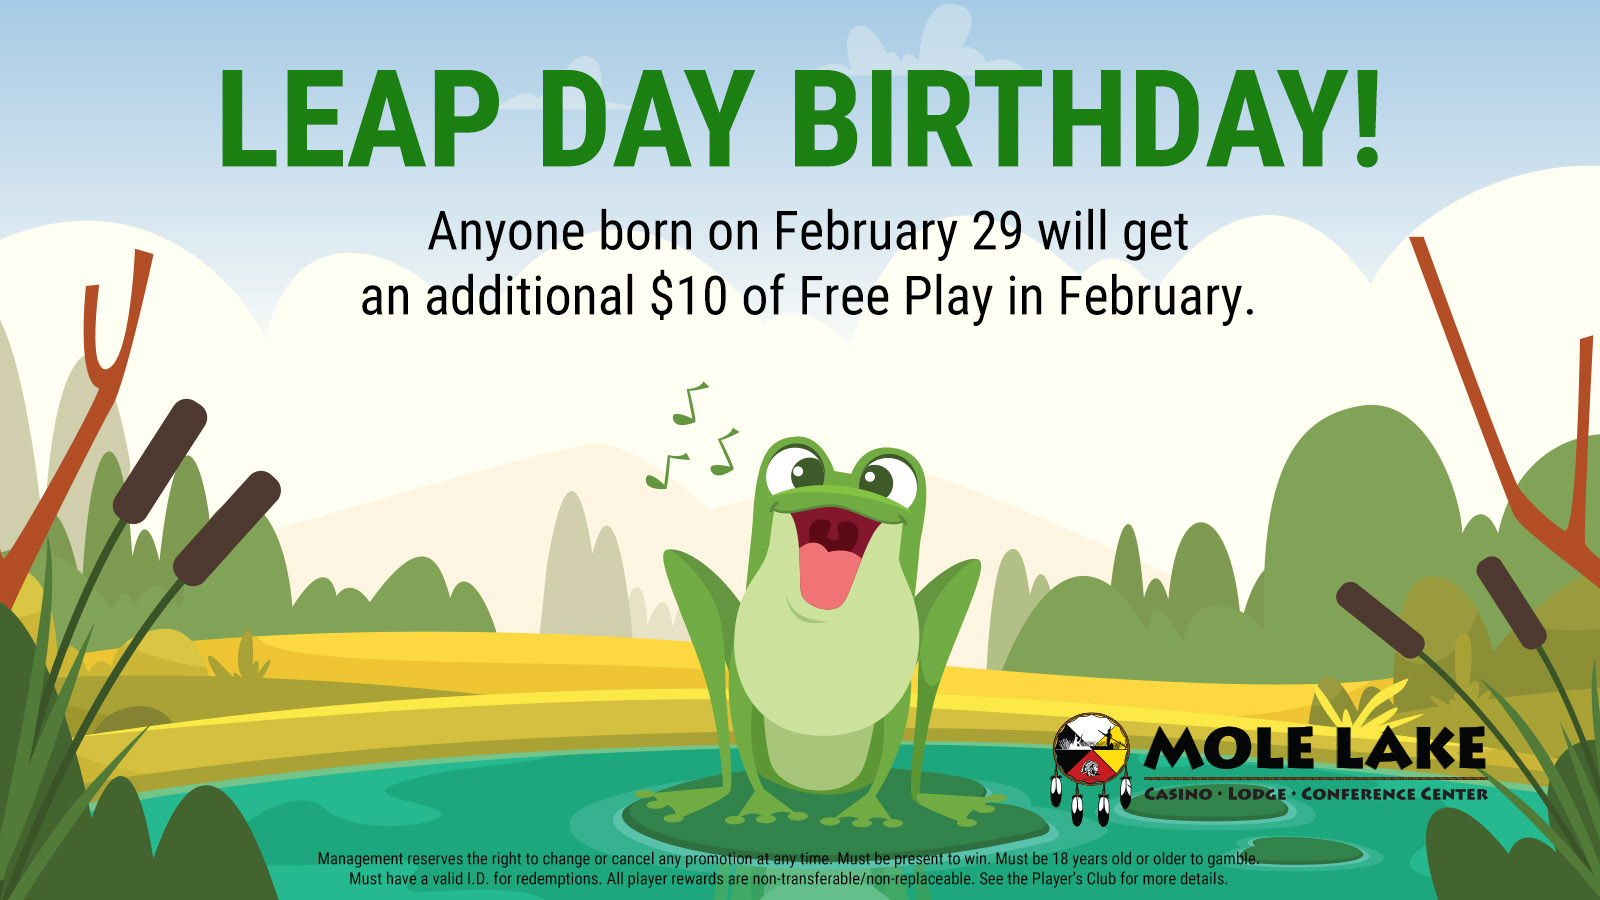 Leap Day Birthdays Qualify for $10 in Free Play At Mole Lake Casino February 29th